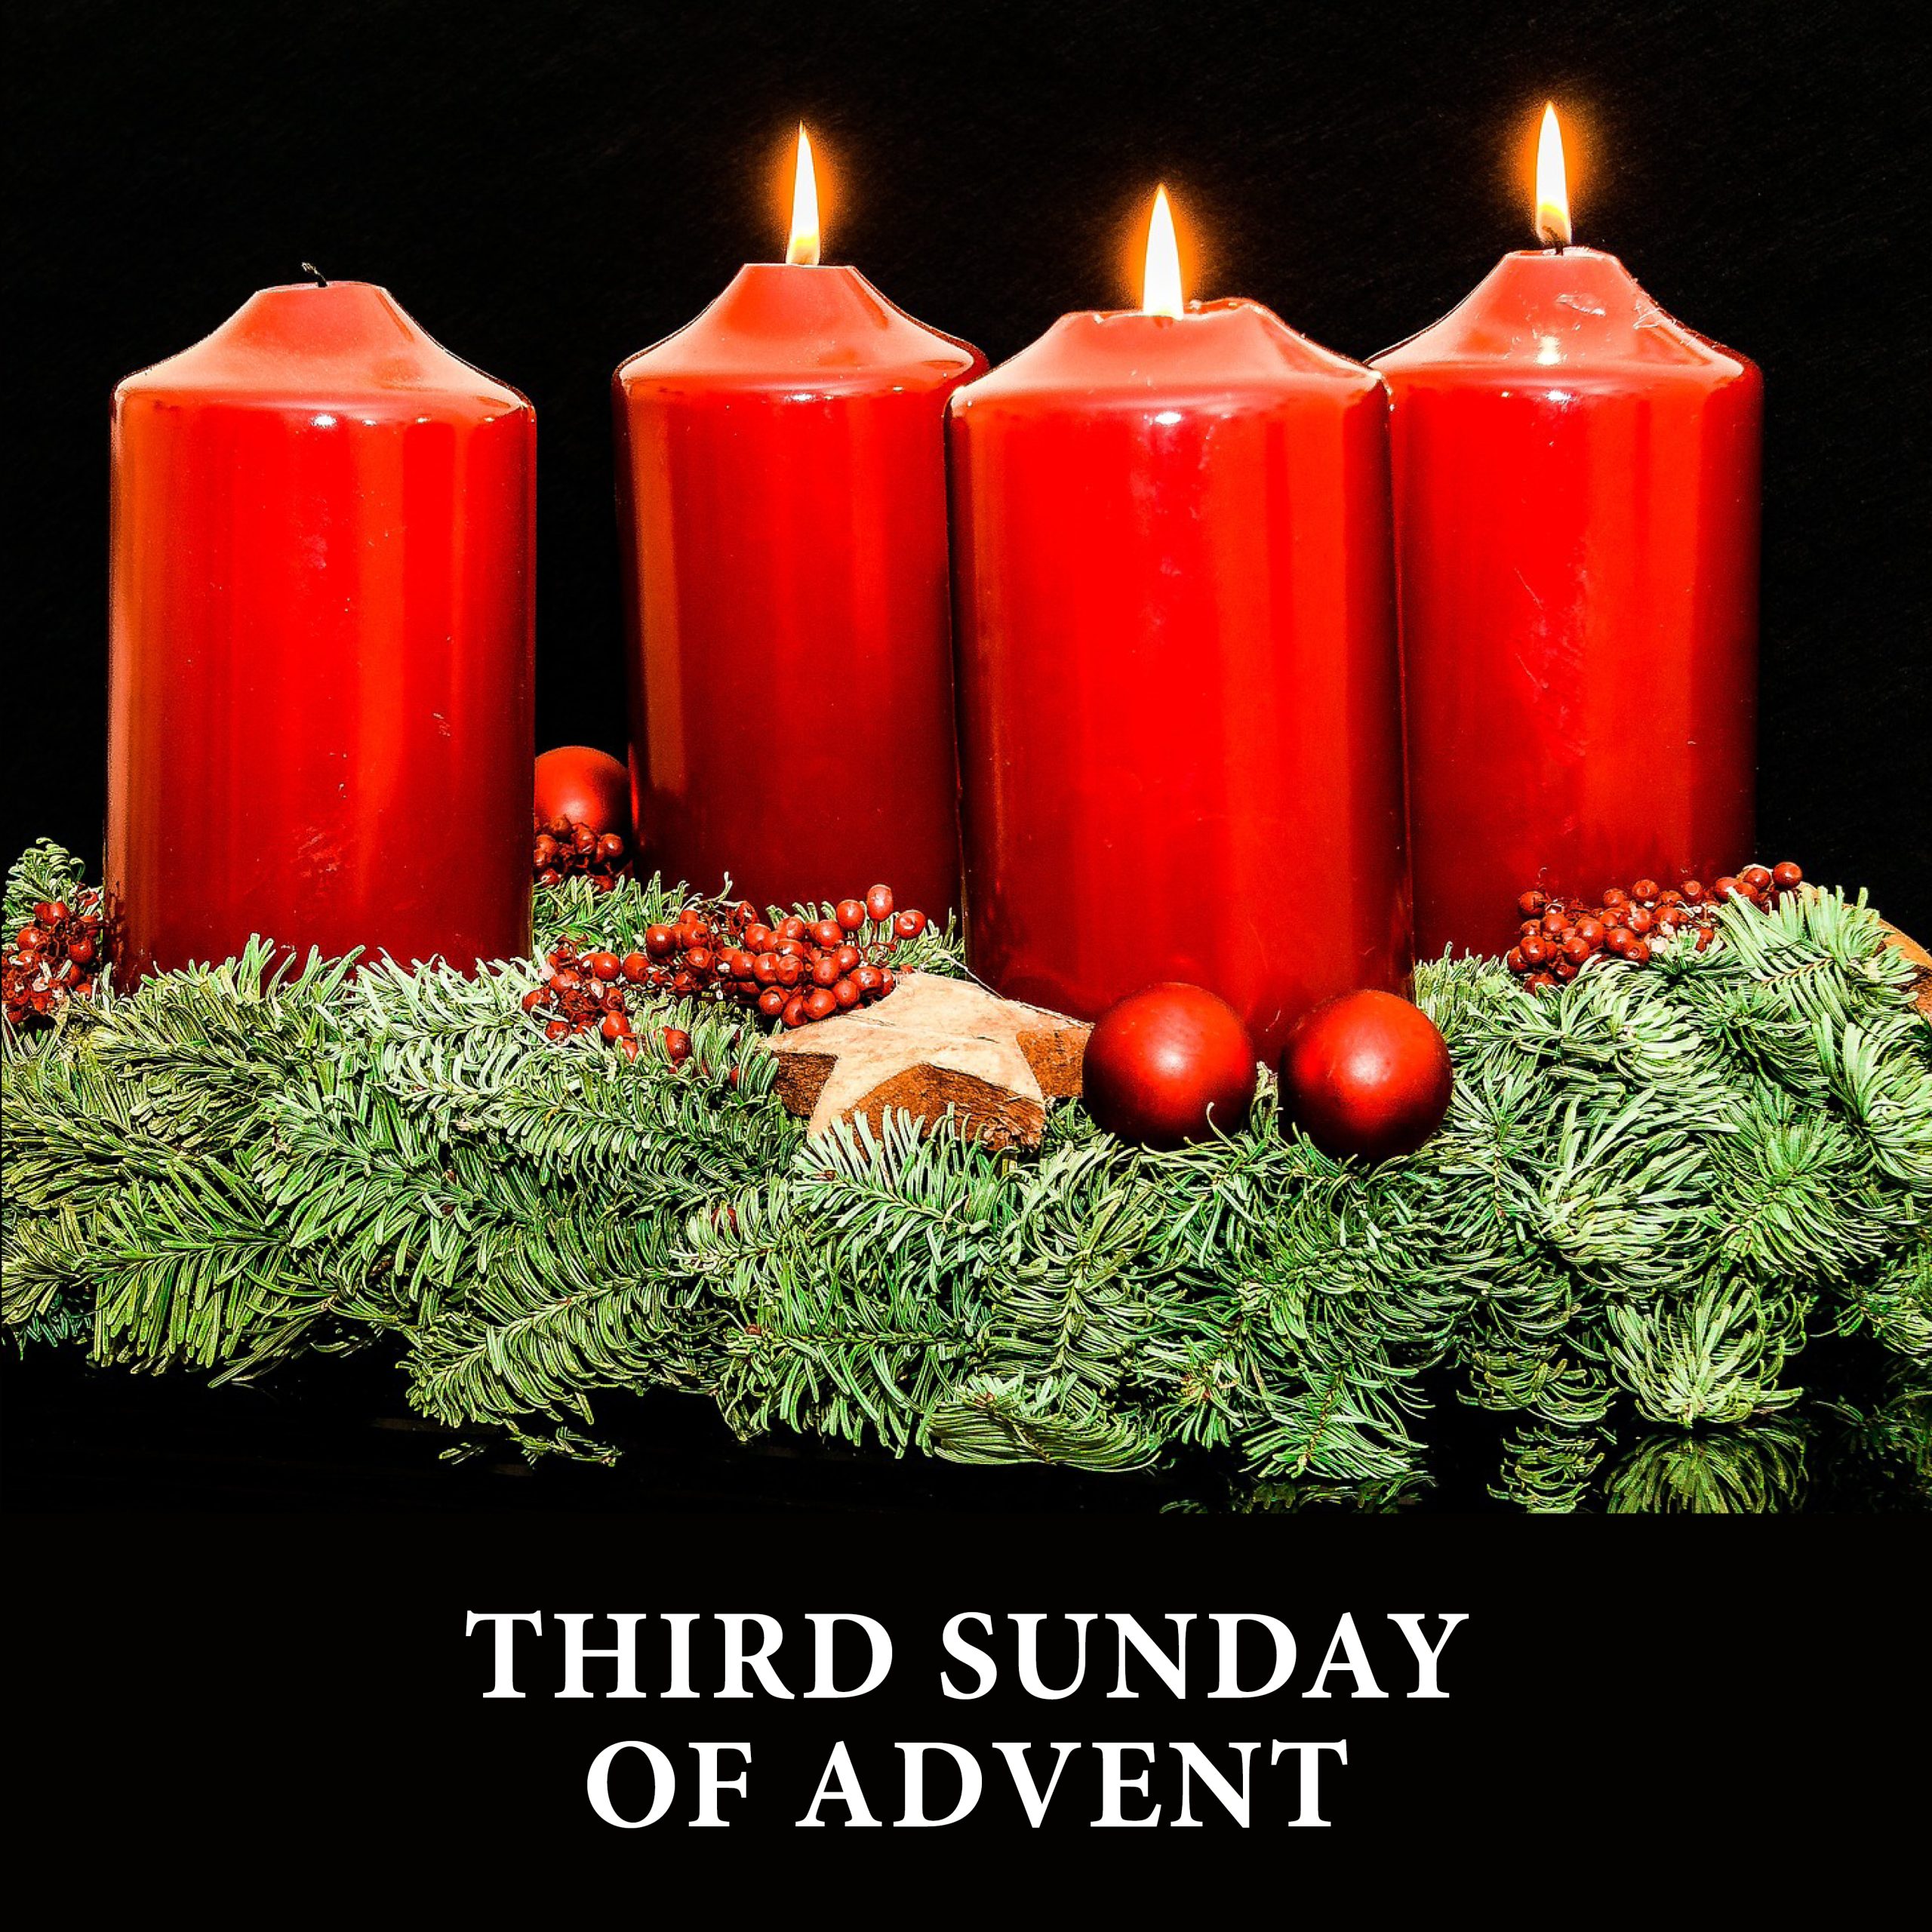 Our Lady of the Wayside Catholic Church Third Sunday of Advent